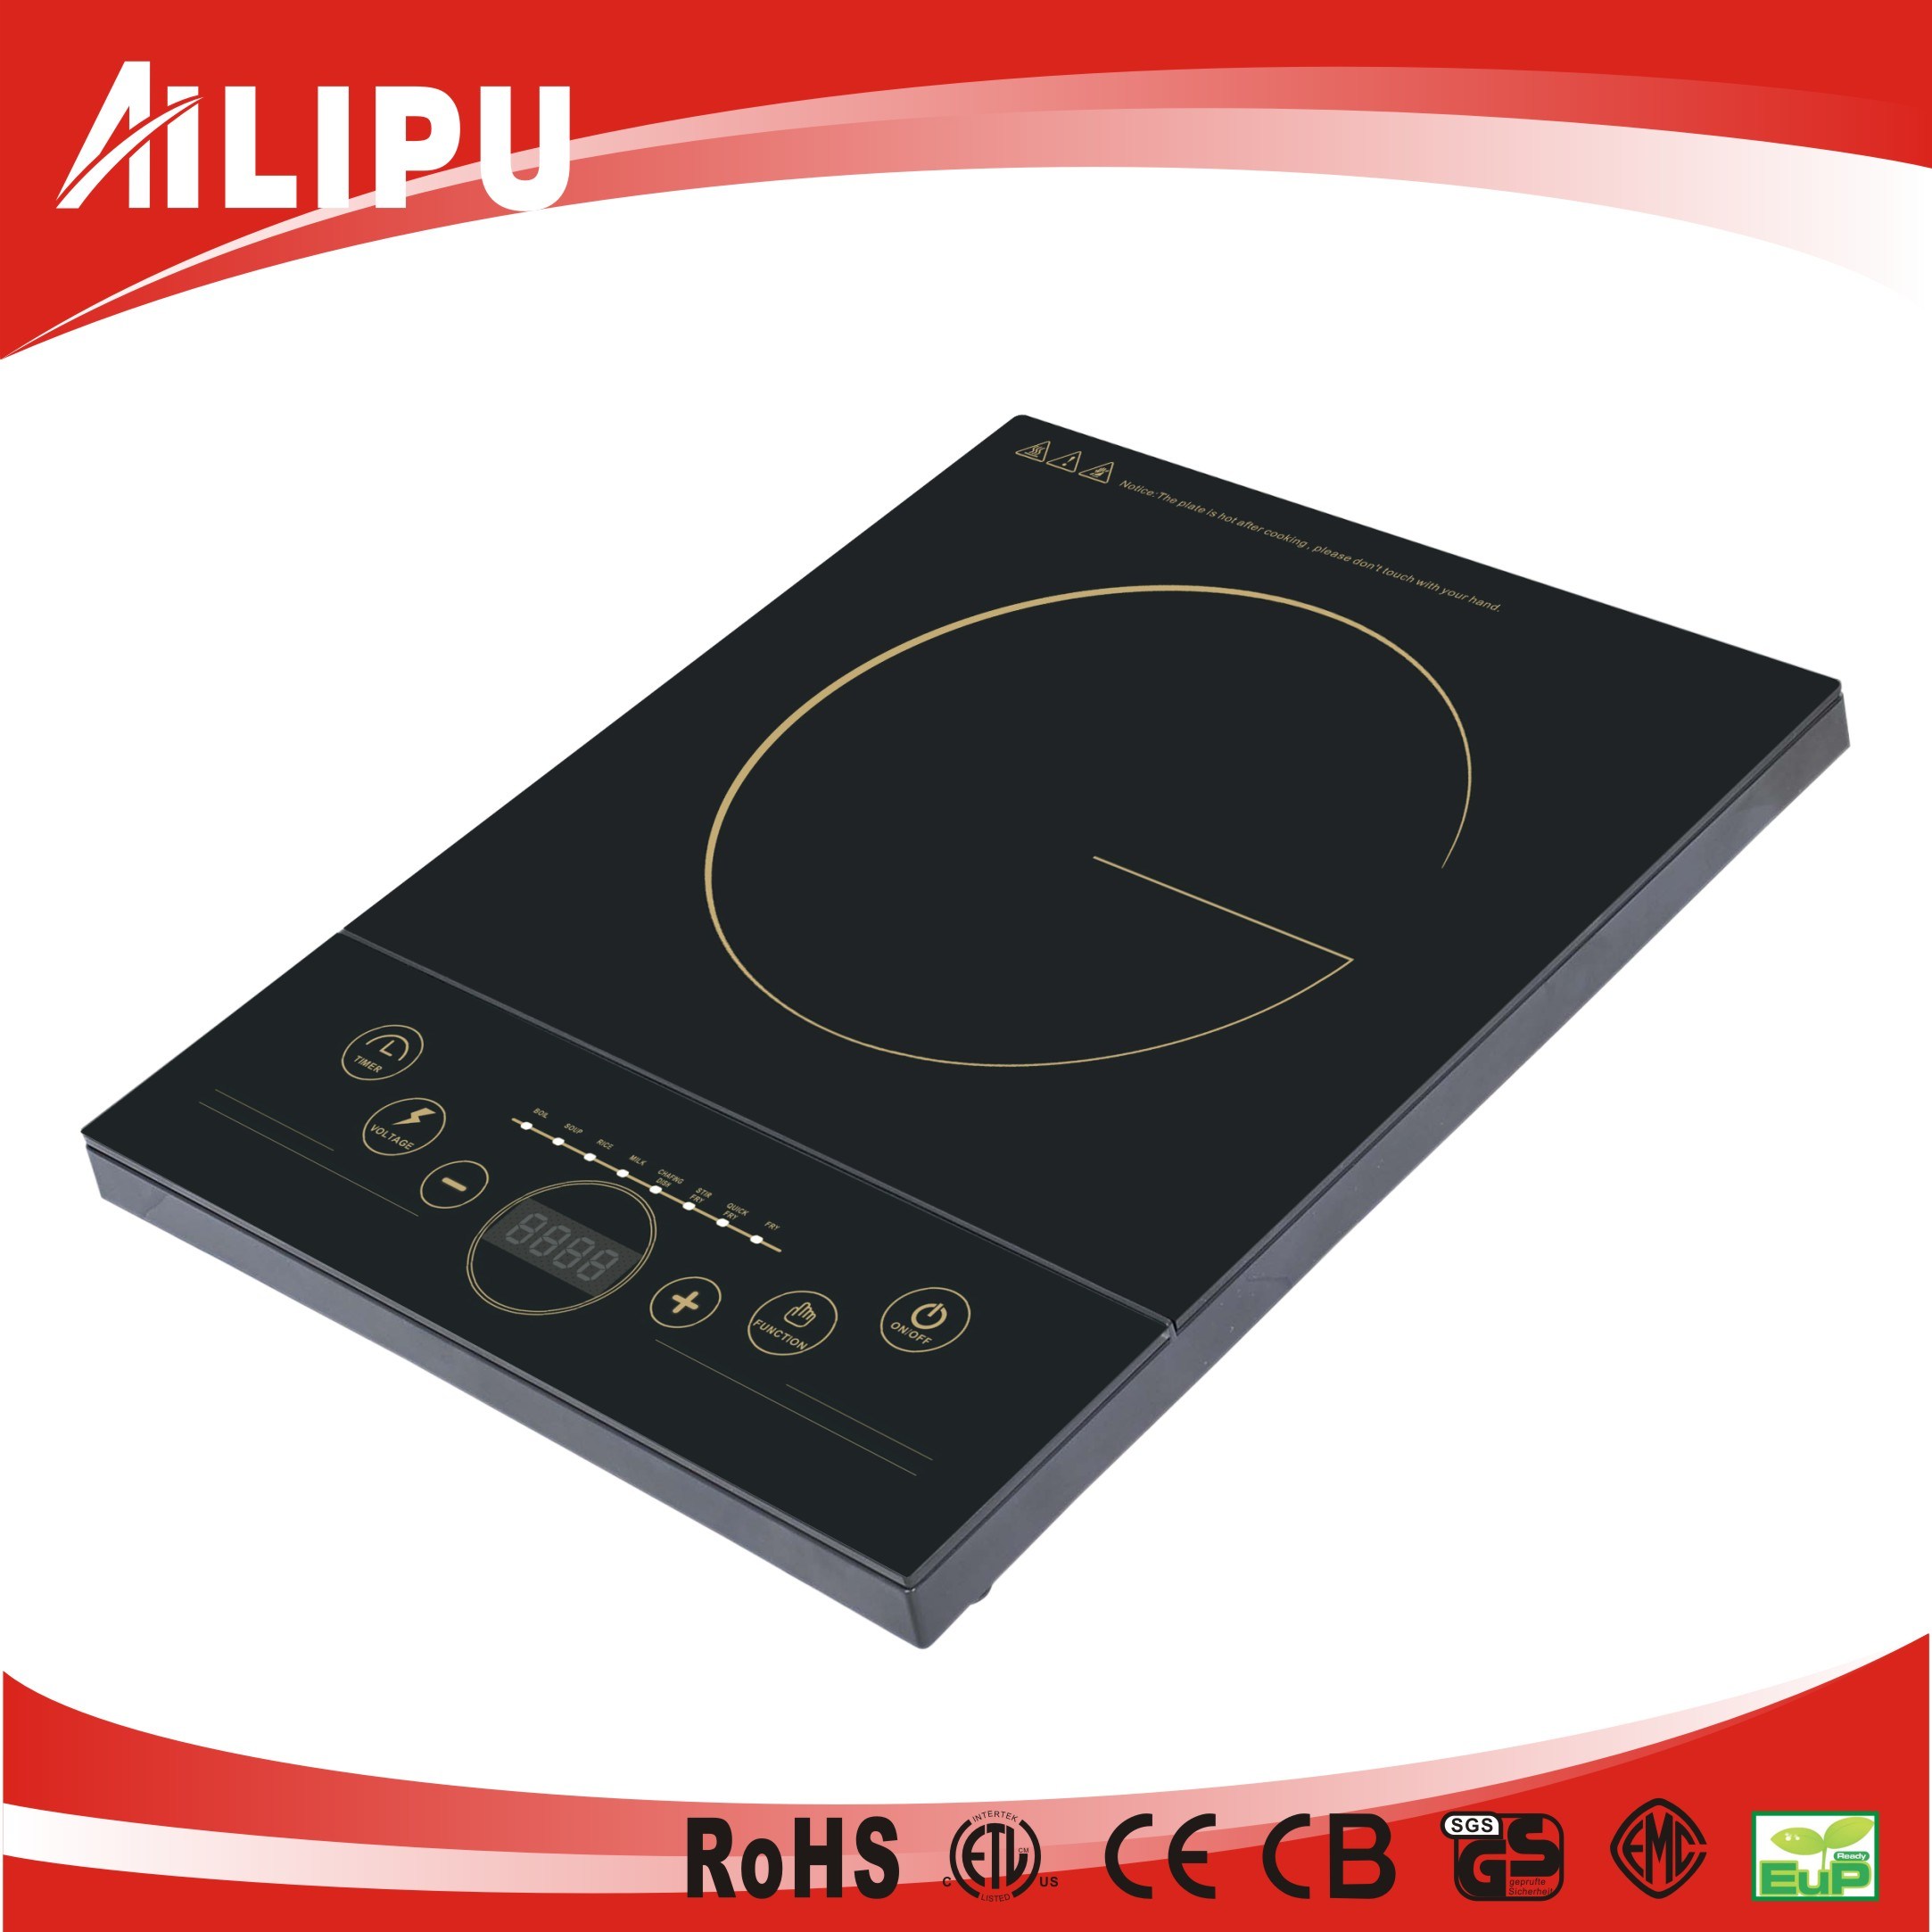 New Product of Kitchenware, Slim and Big Induction Cooker, 110V/60Hz, Electric Cookware, Induction Plate, Promotional Gift (SM-A45)